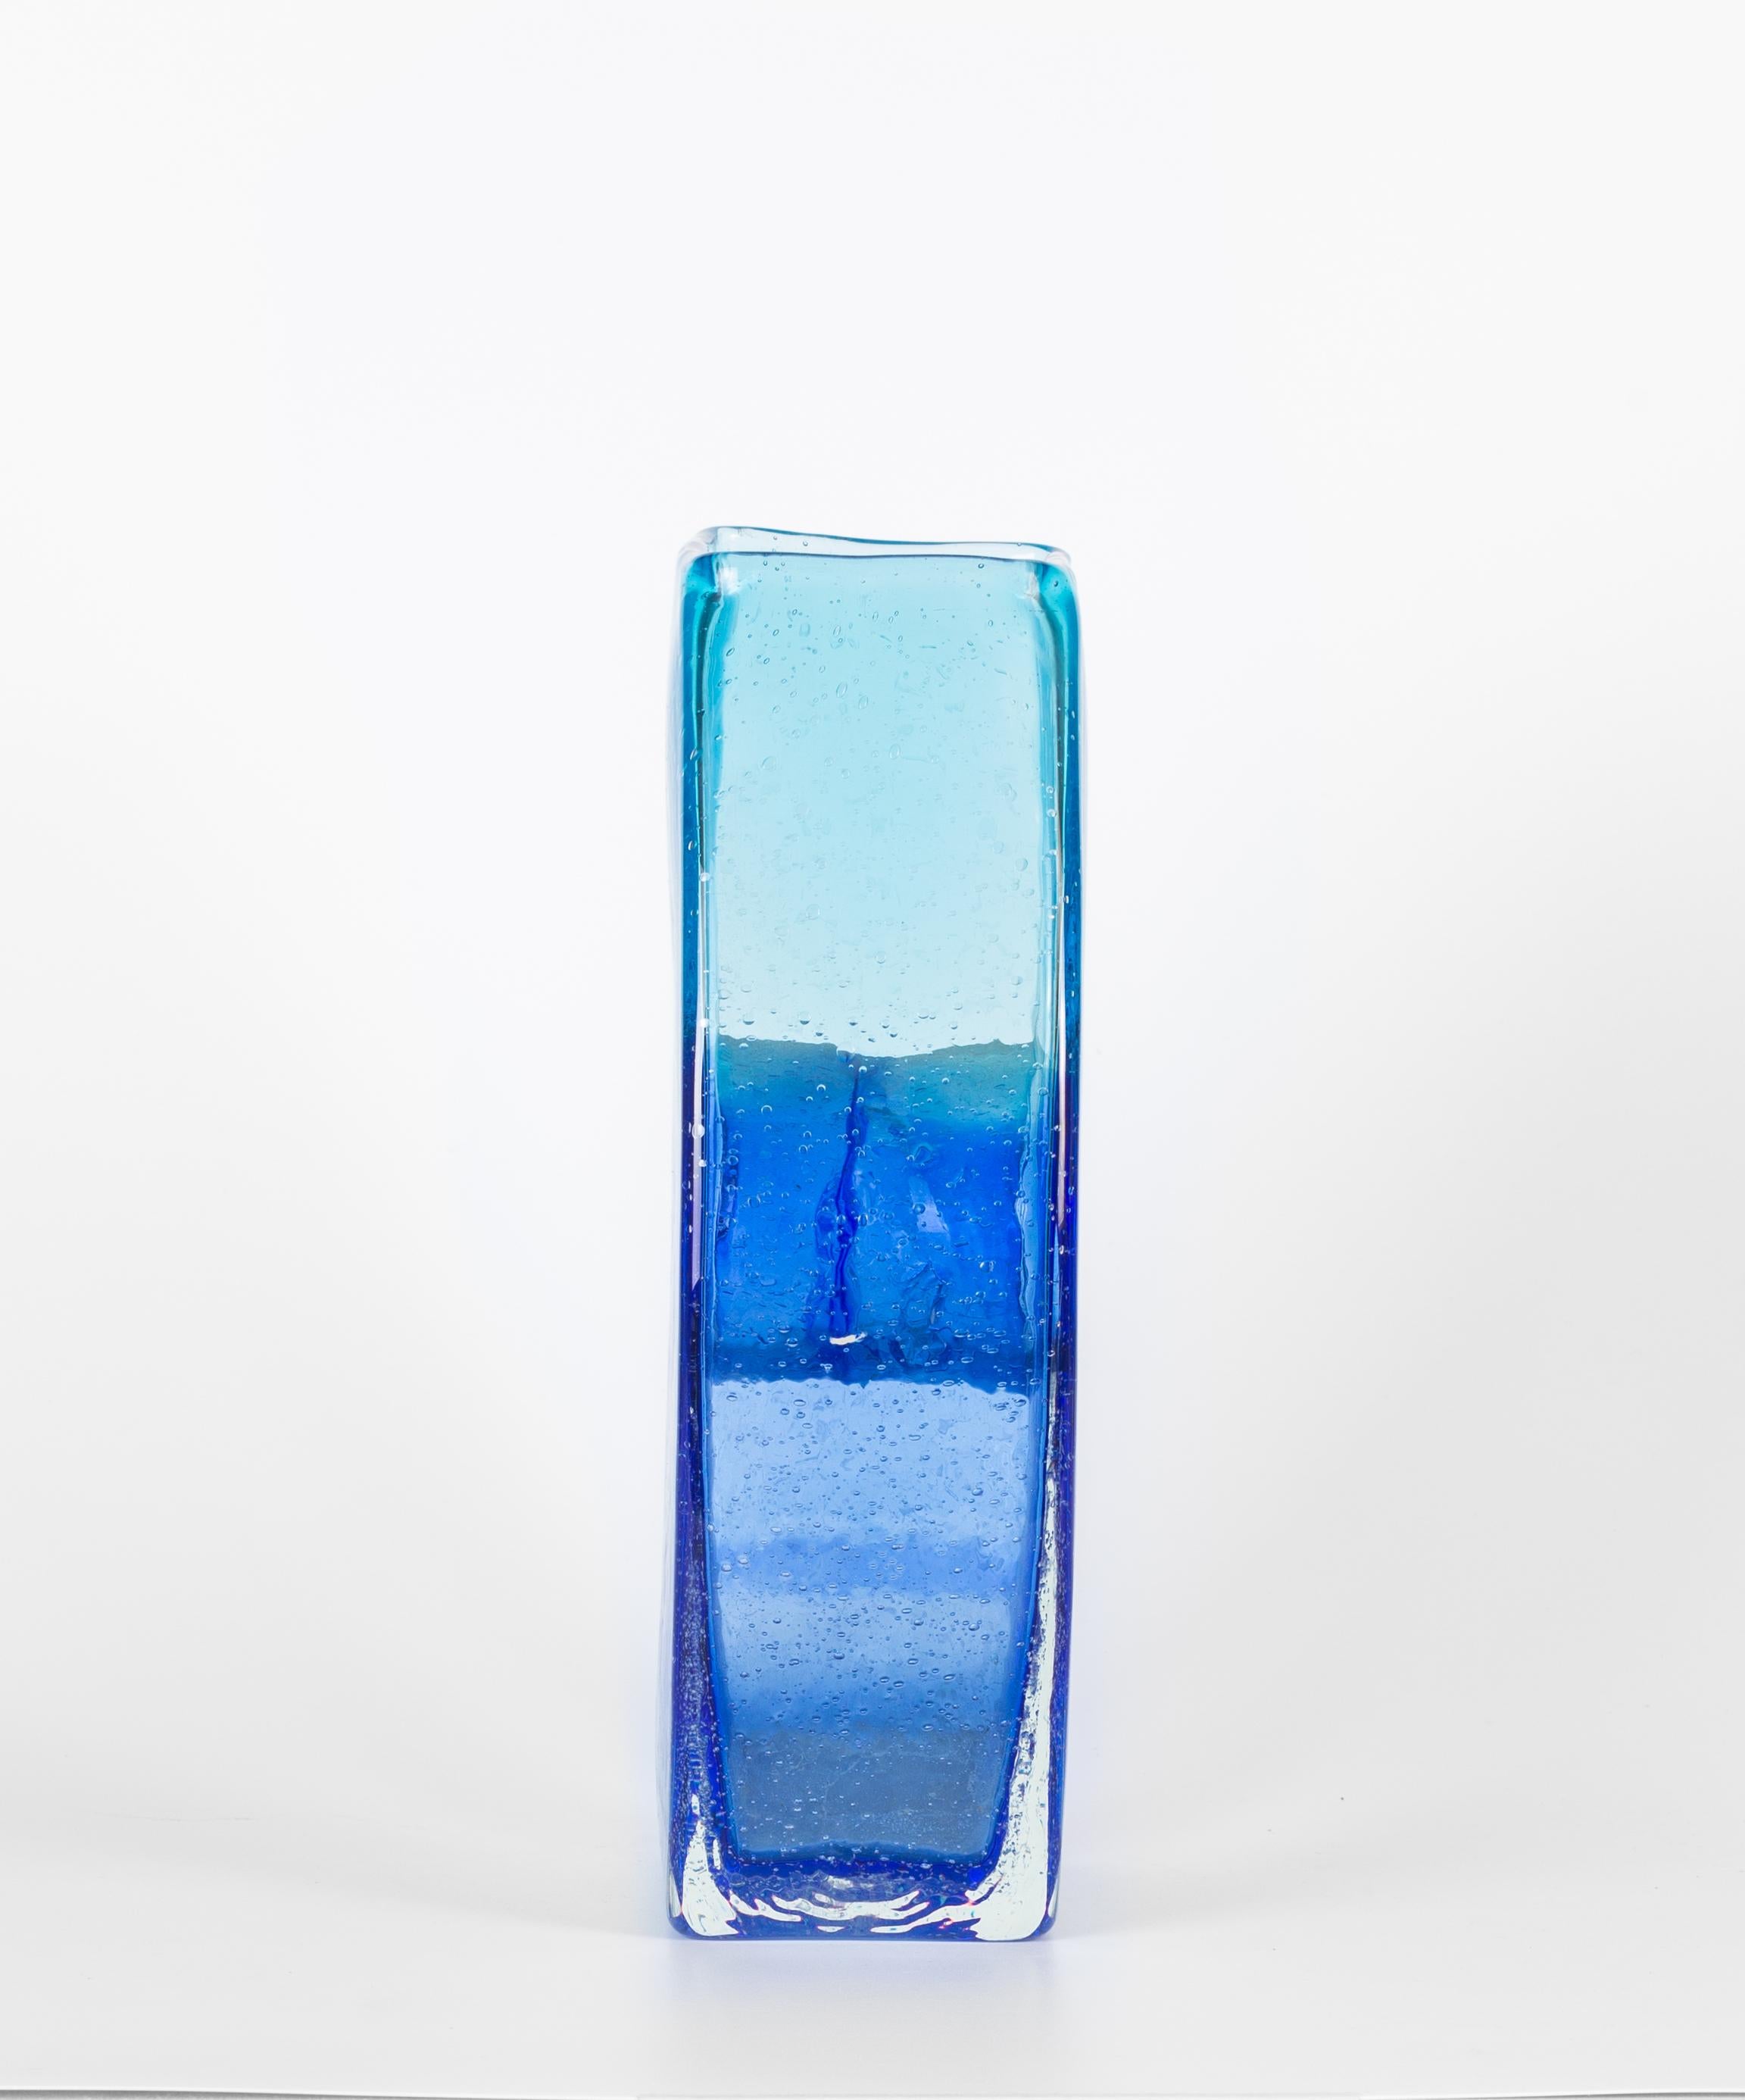 Transparent blue glass flowers vase is a beautiful glass decorative object, realized by a Murano manufacture during the 1970s. 

Very fashionable transparent blue colored vase with a circular shape in the center. 

This is the perfect vase to